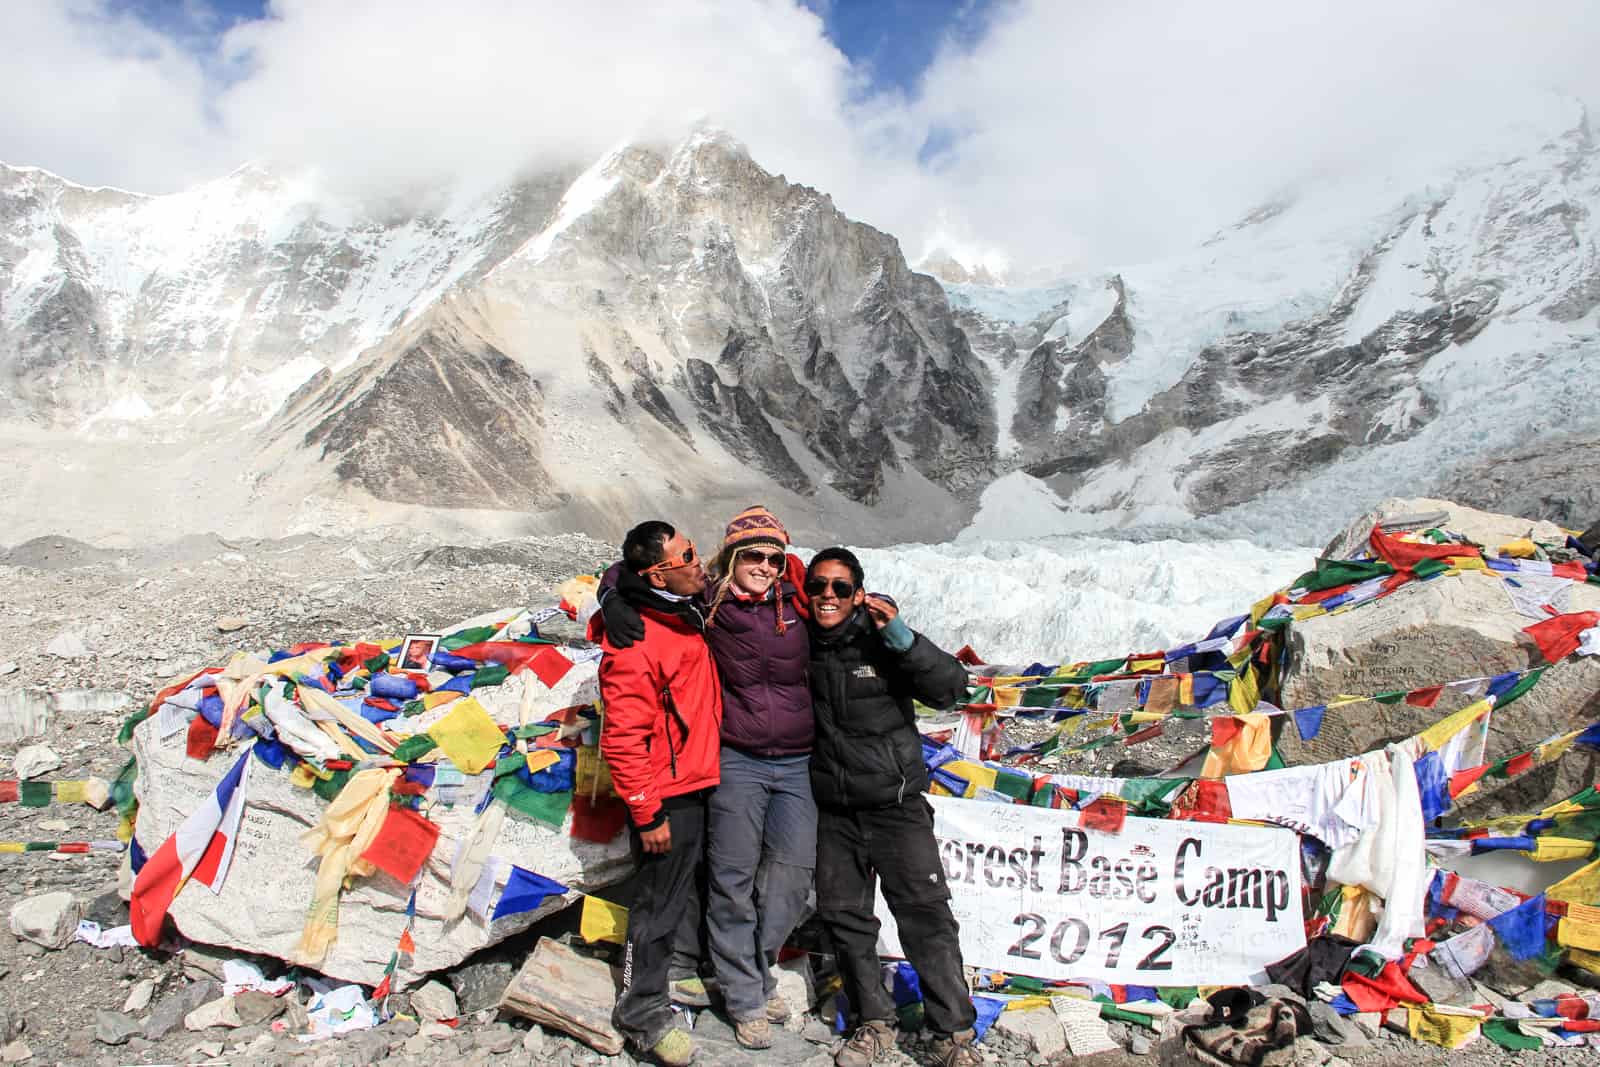 A woman in a purple jacket stands in the middle of two Nepali trekking guides at Everewst Base Camp. They stand in front of a rock mound in front of a text sign and prayer flags, and behind them is the white panorama of the mountain range.